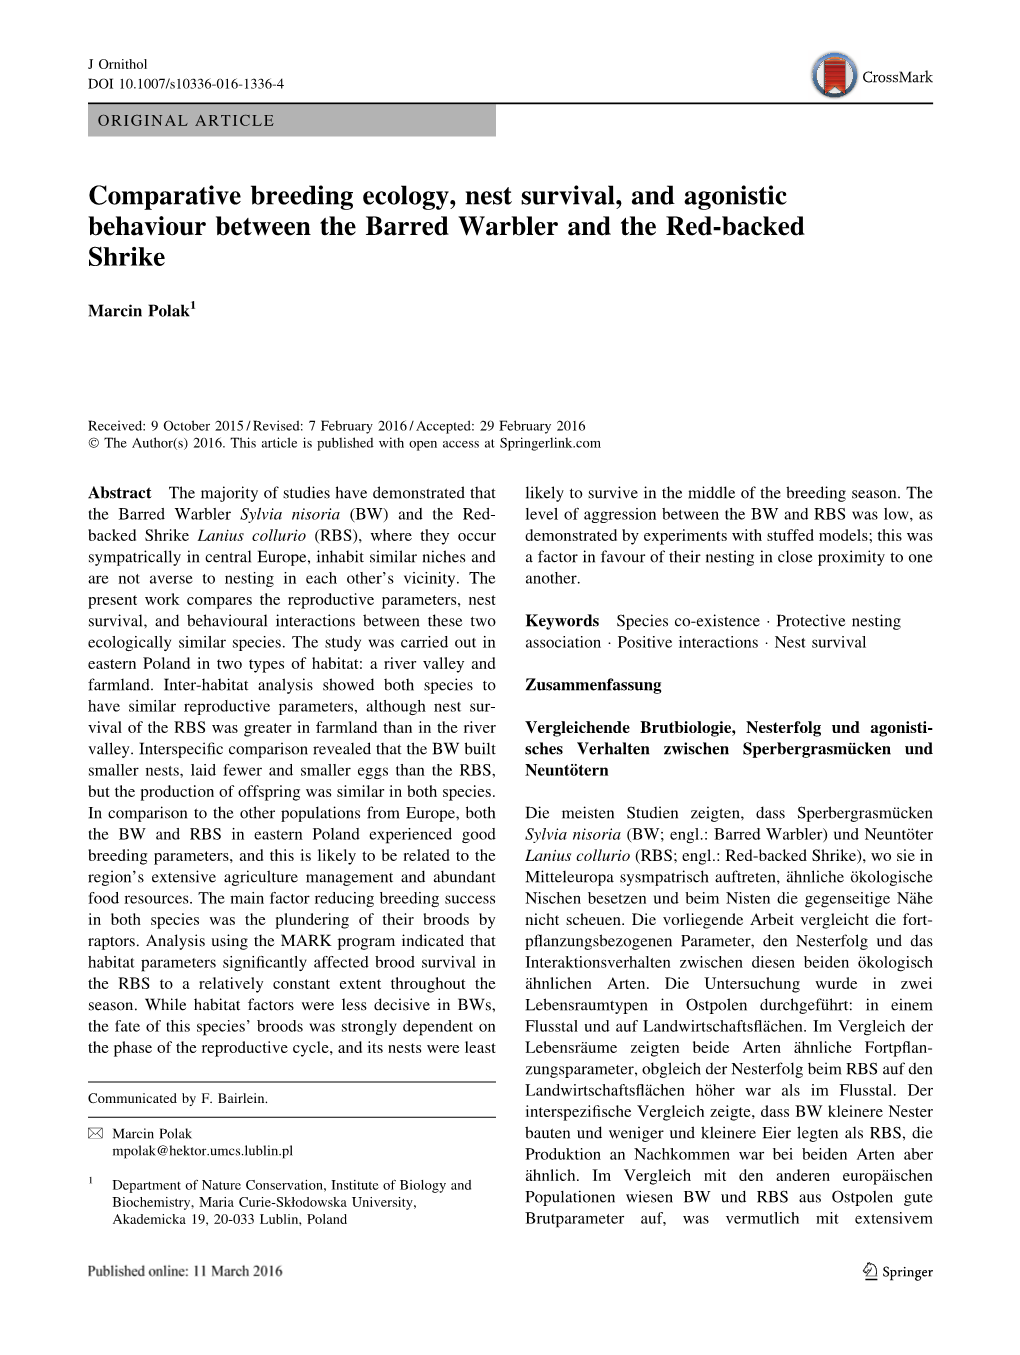 Comparative Breeding Ecology, Nest Survival, and Agonistic Behaviour Between the Barred Warbler and the Red-Backed Shrike